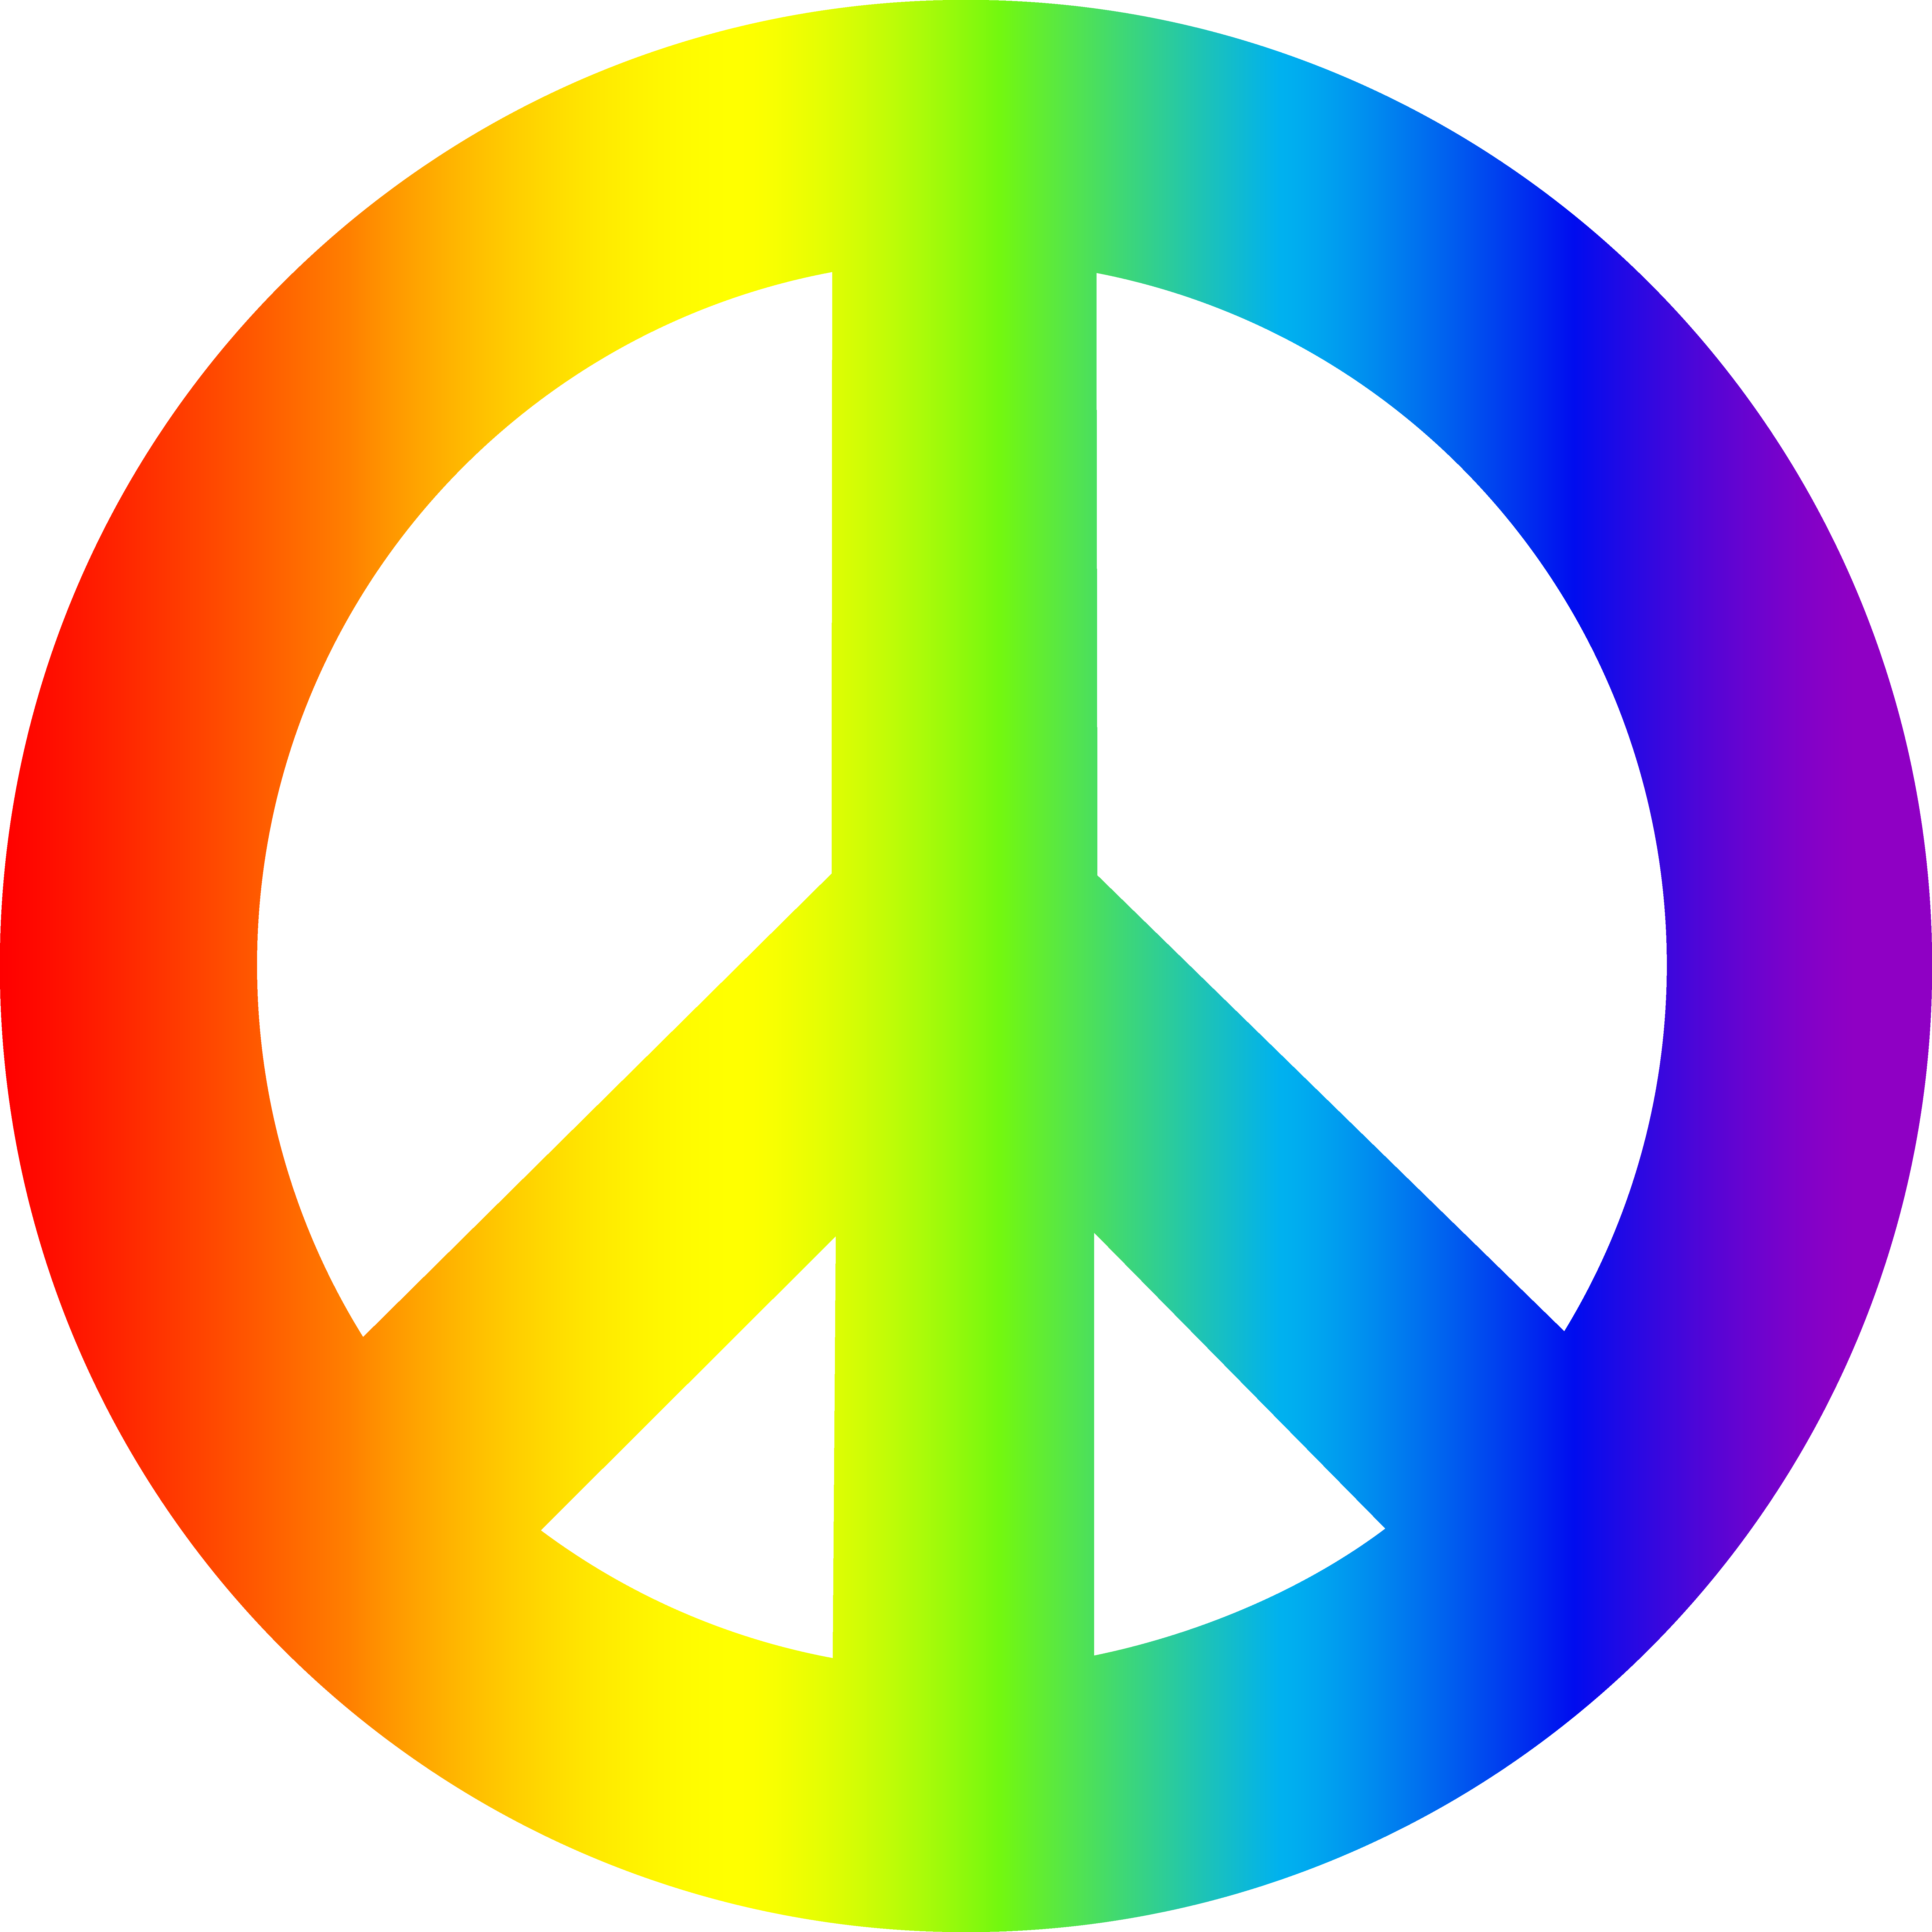 Colorful Peace Sign Clipart | Clipart Panda - Free Clipart Images